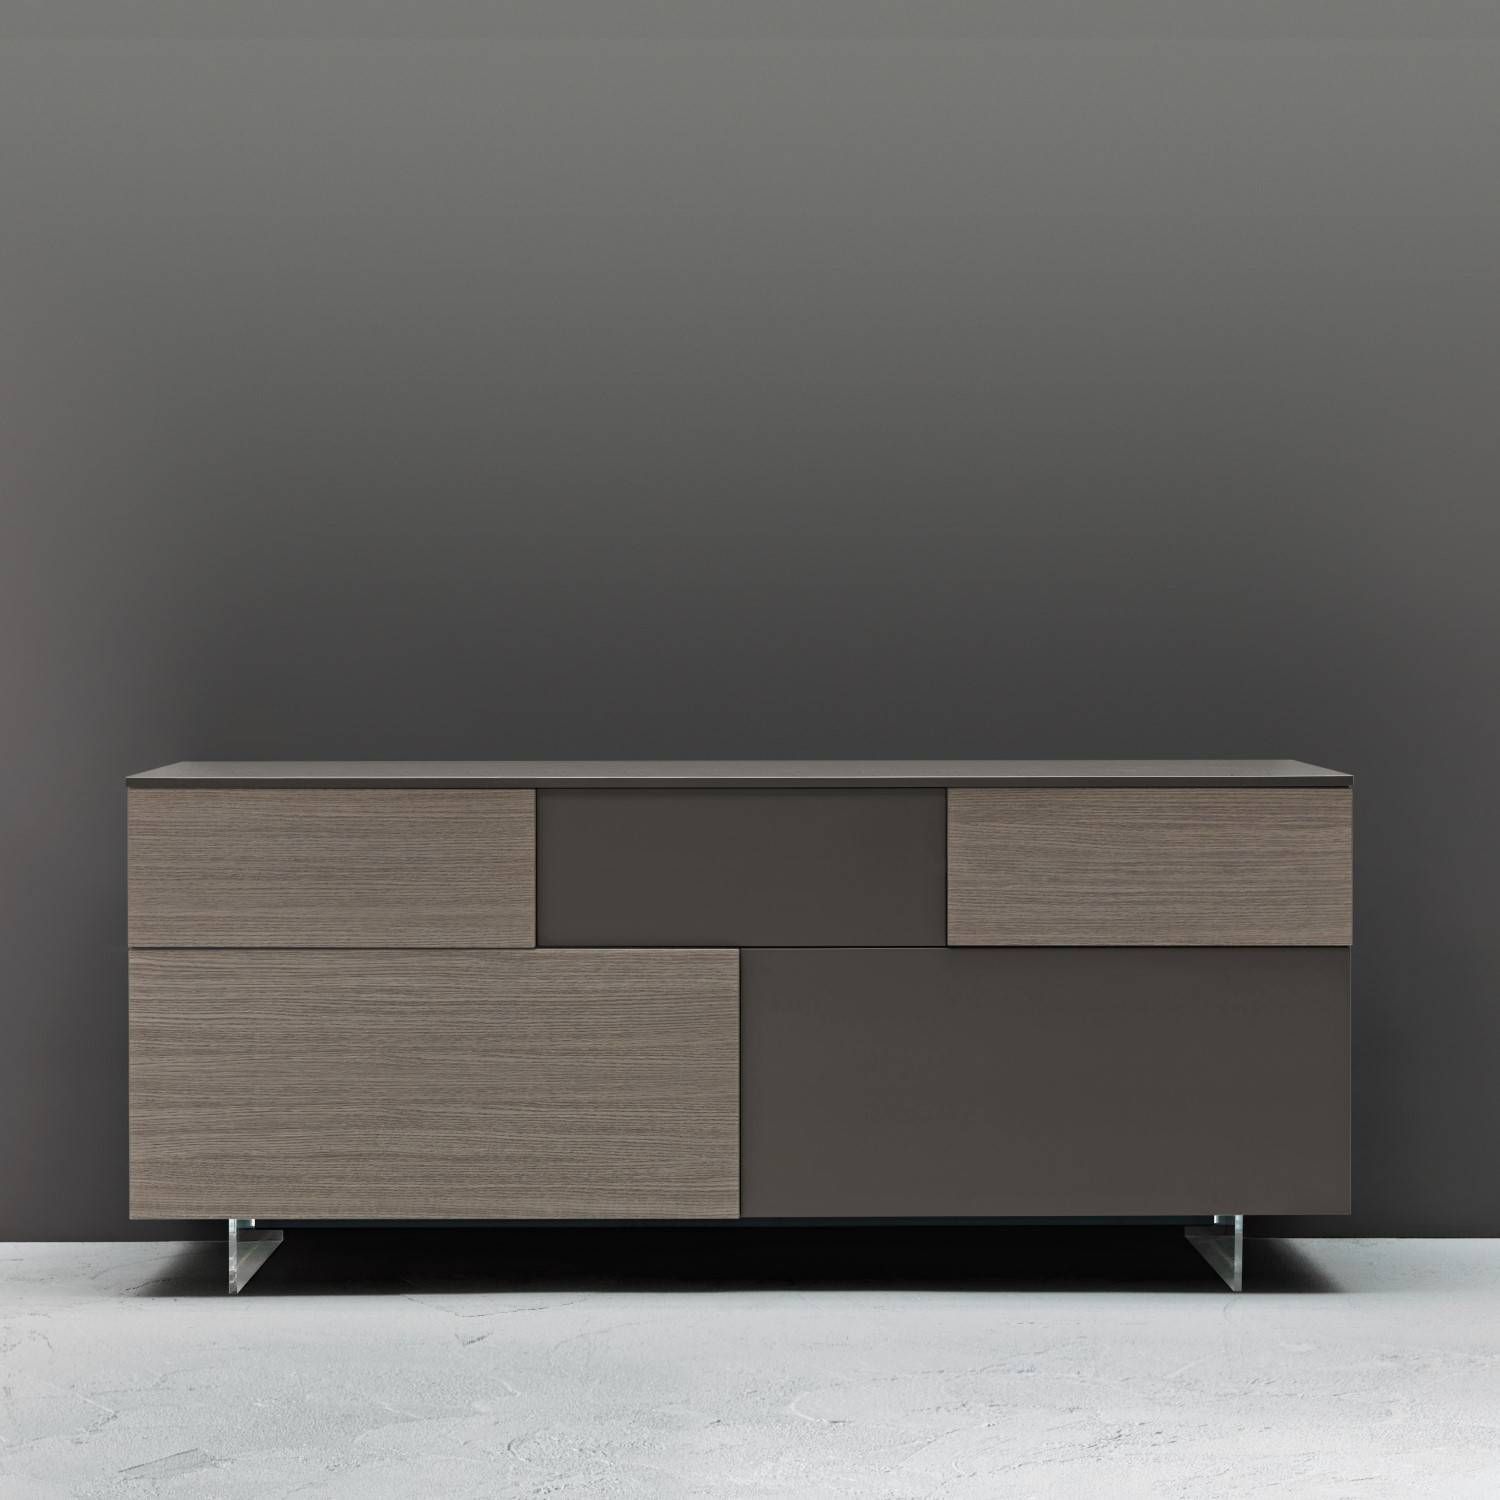 Astounding Modern Dark Grey Oak Sideboard Design With Stacked Intended For Large Modern Sideboard (View 20 of 20)